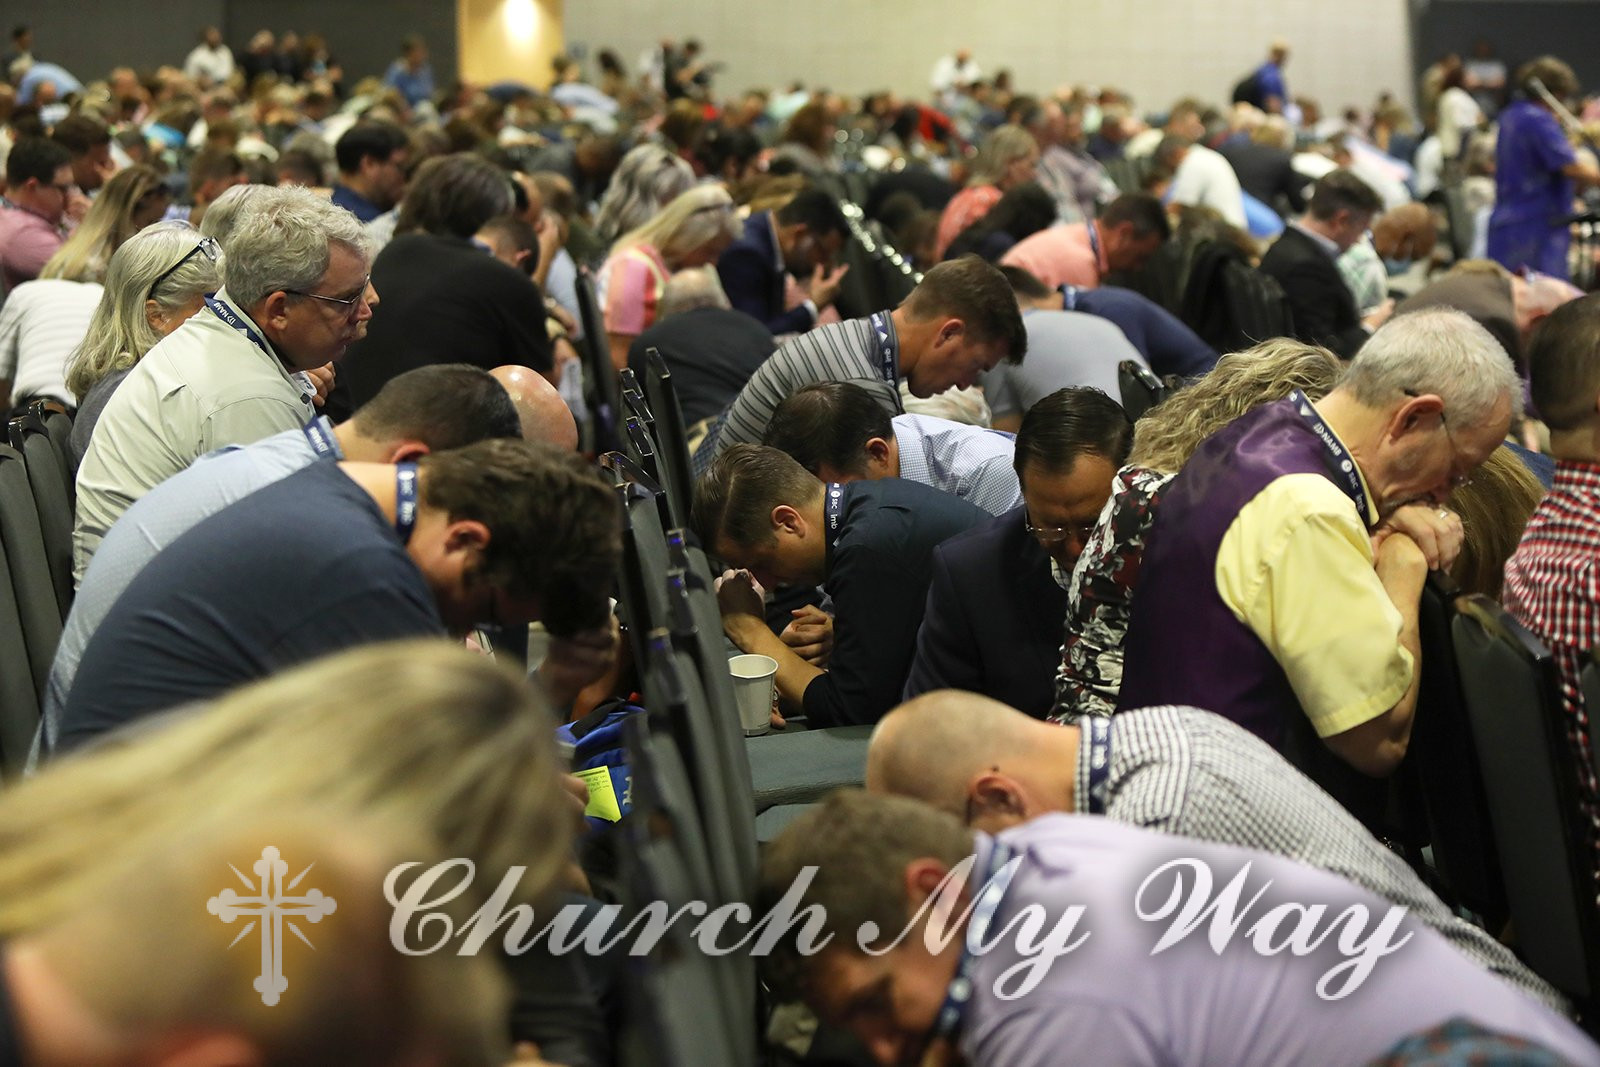 Southern Baptist Convention messengers kneel in prayer during the annual meeting, June 15, 2021, at the Music City Center in Nashville, Tennessee. RNS photo by Kit Doyle